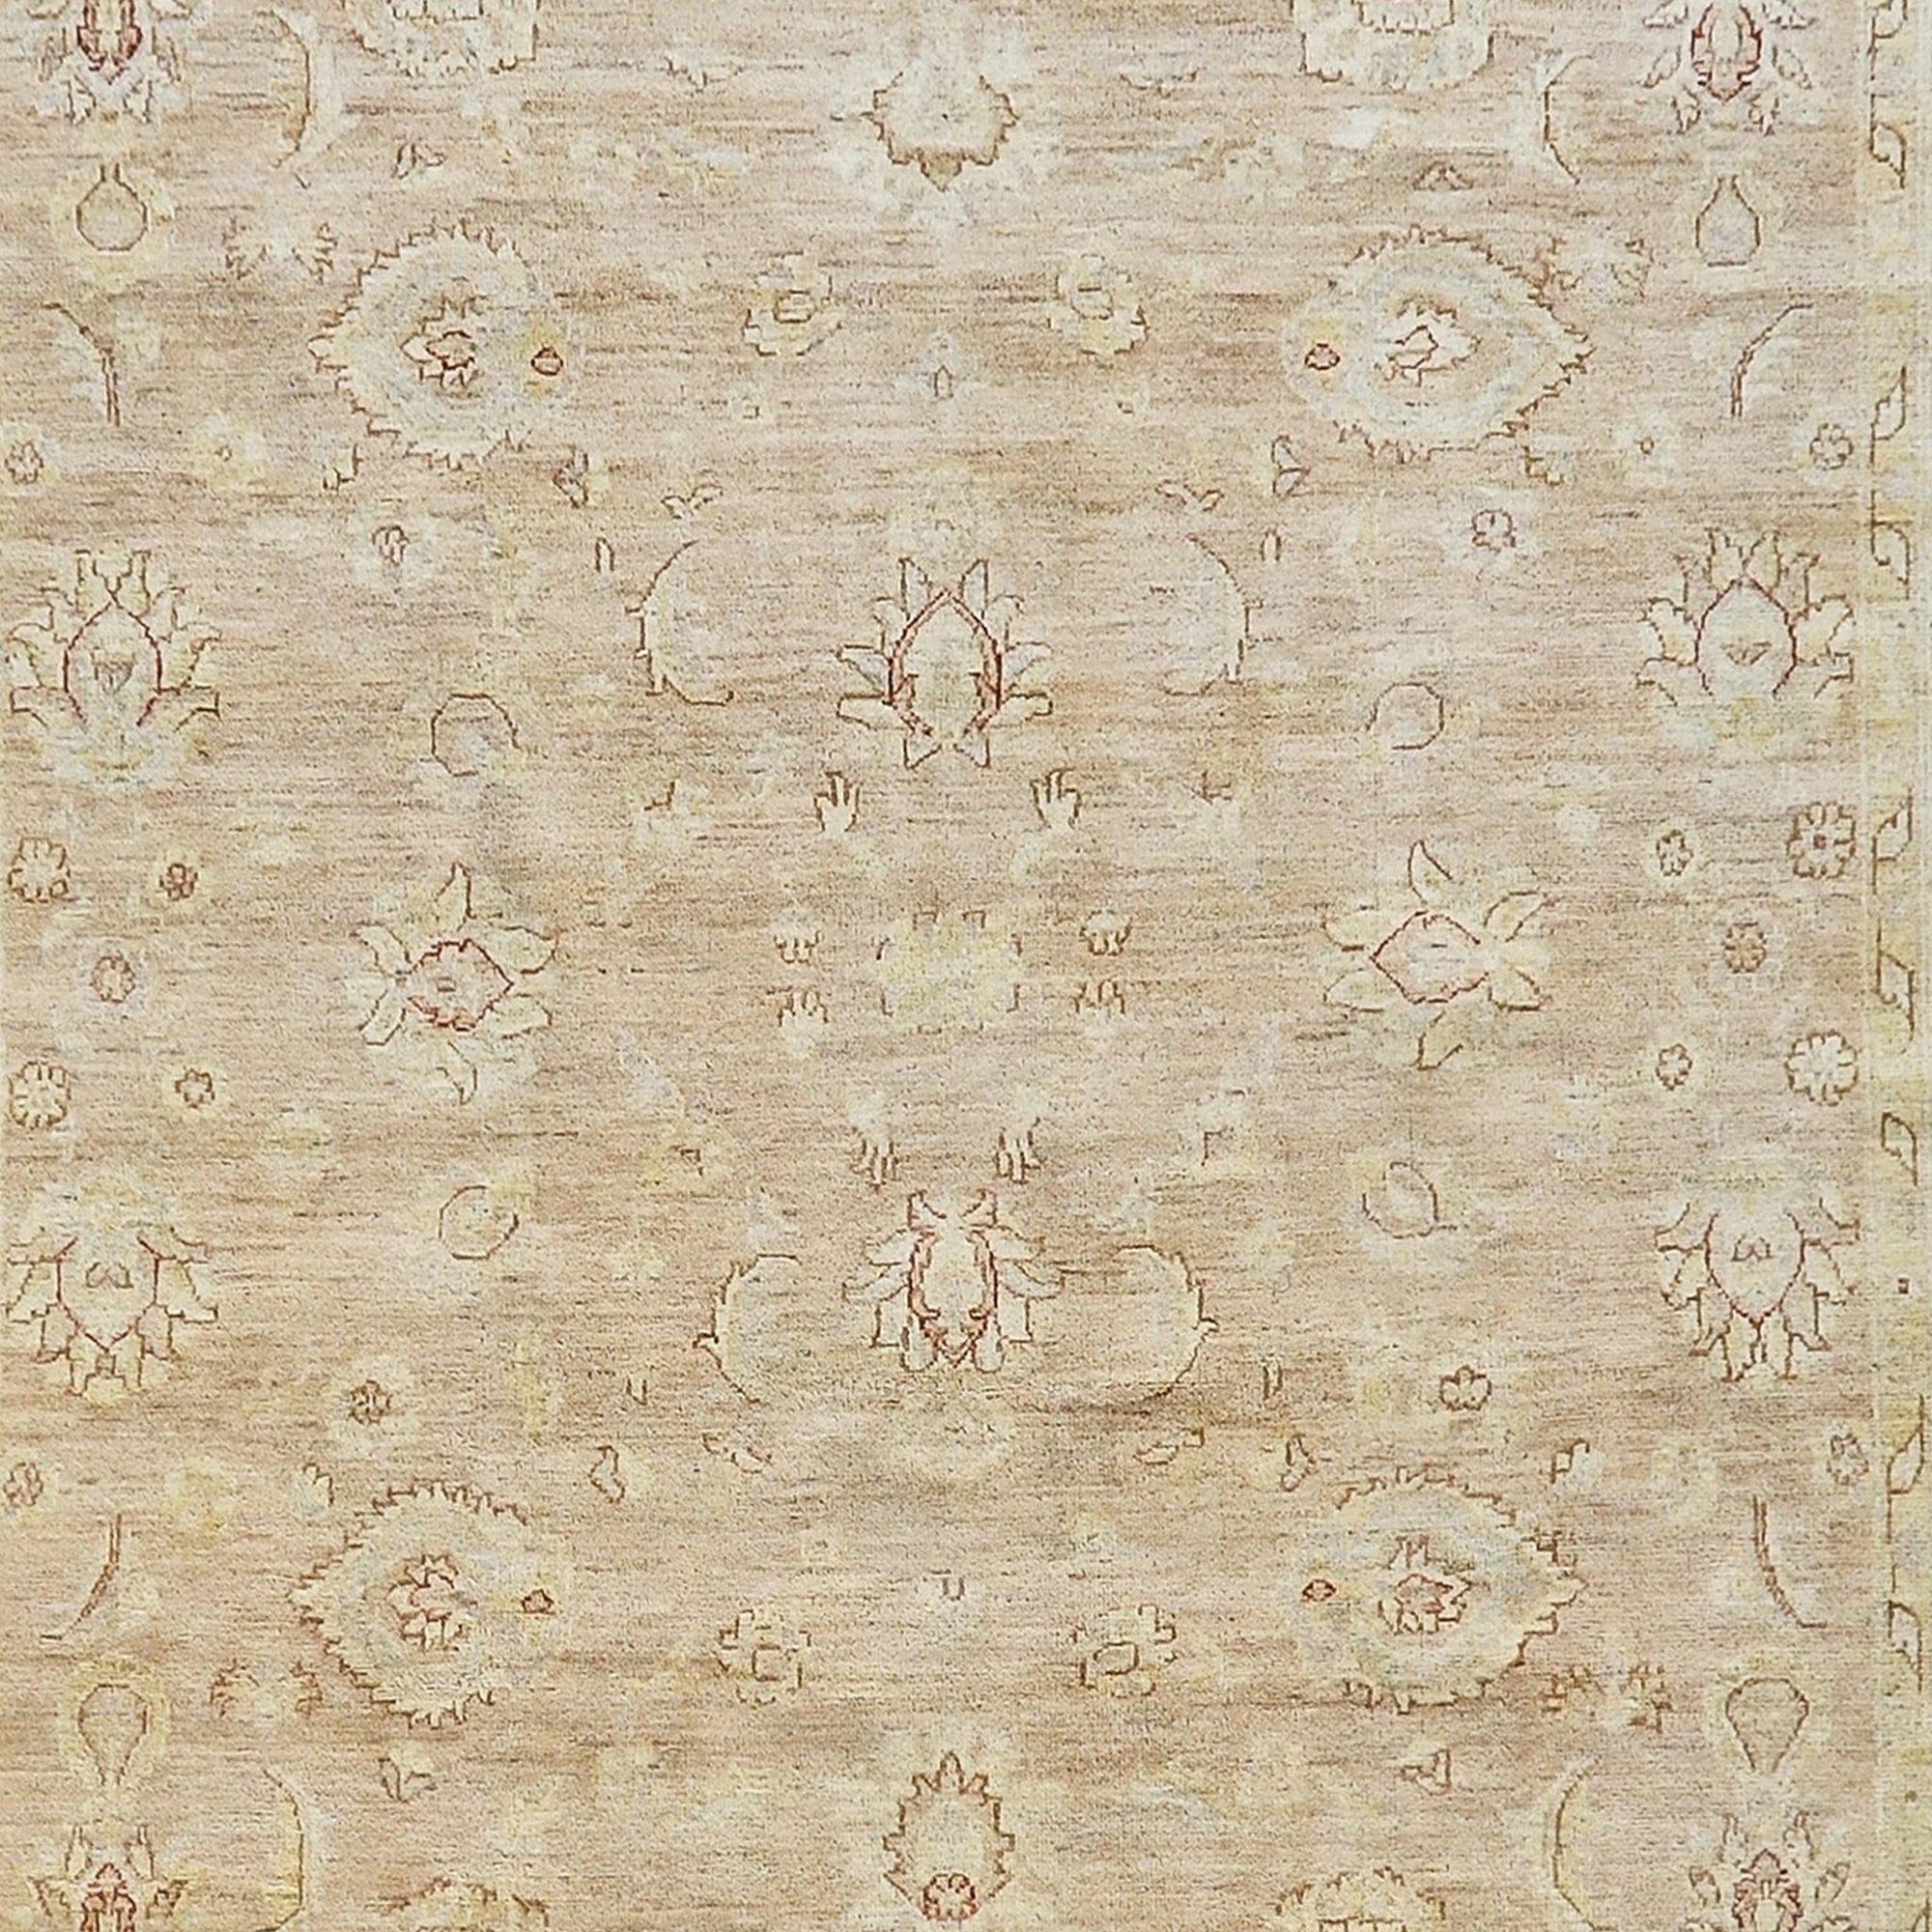 Contemporary Hand-knotted Colour Reform Wool Rug 241cm x 286cm